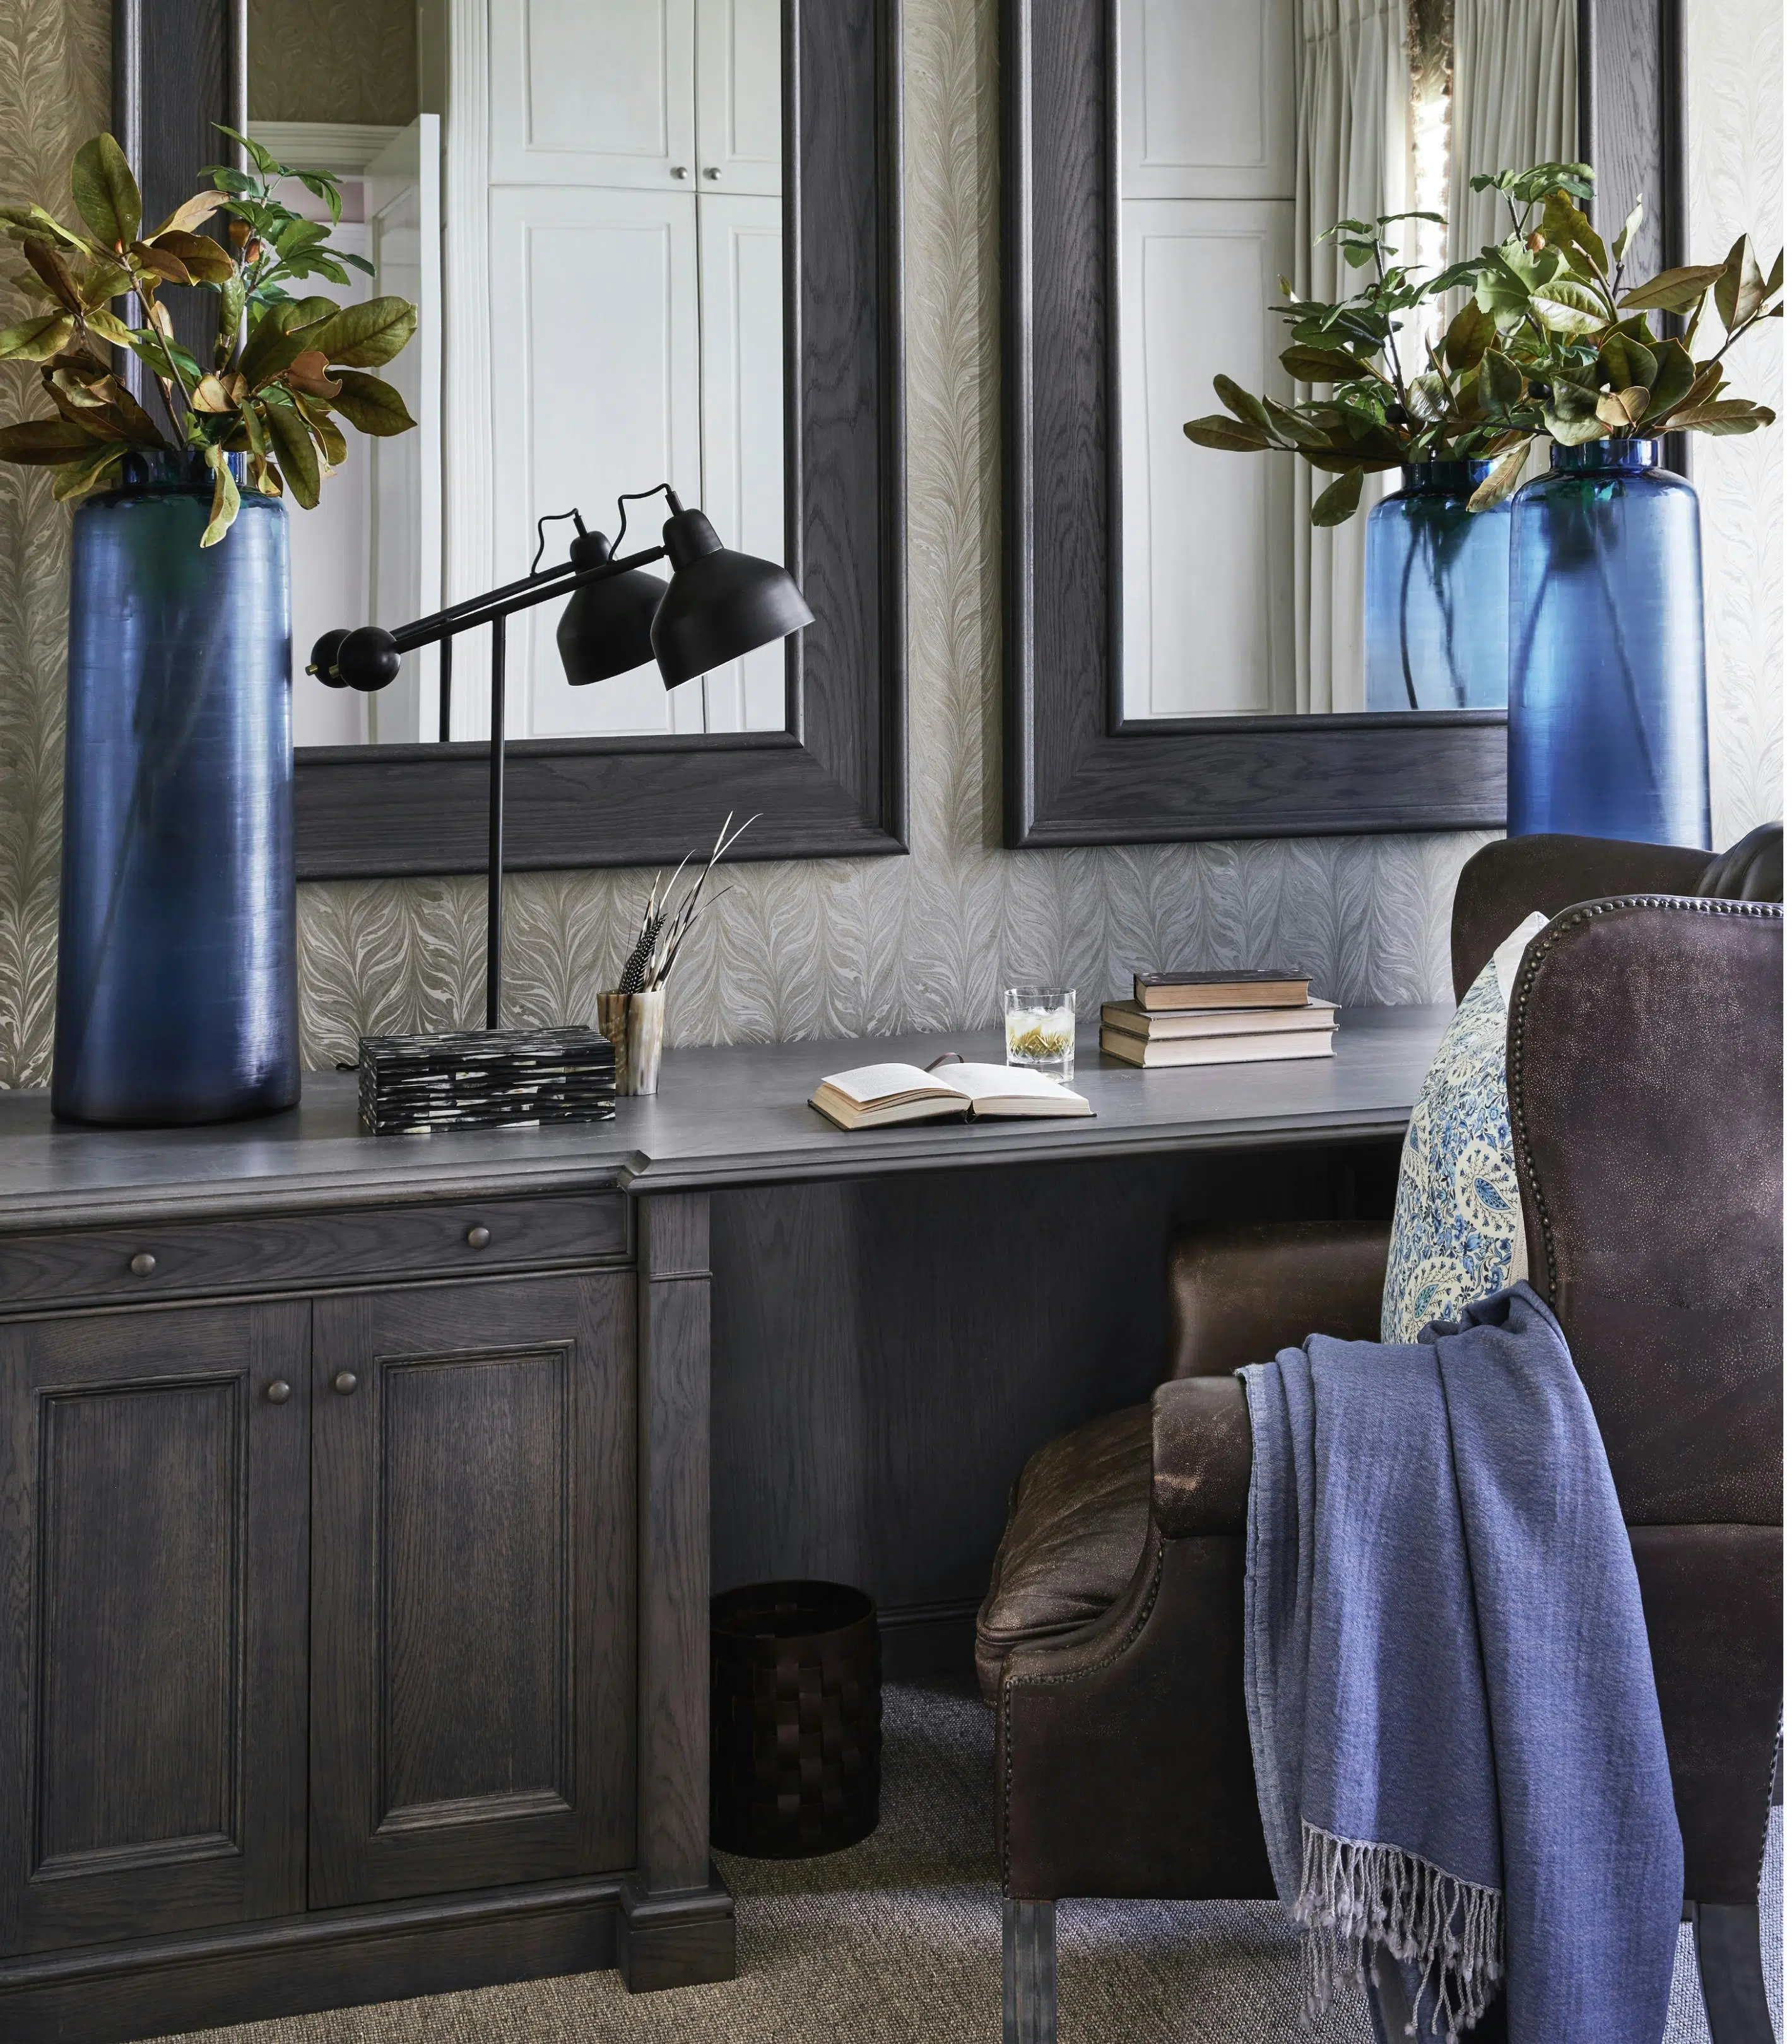 Two large blue vases and a modern table lamp are on top of an ebony-stained wood desk with two mirrors hung up on the wall.